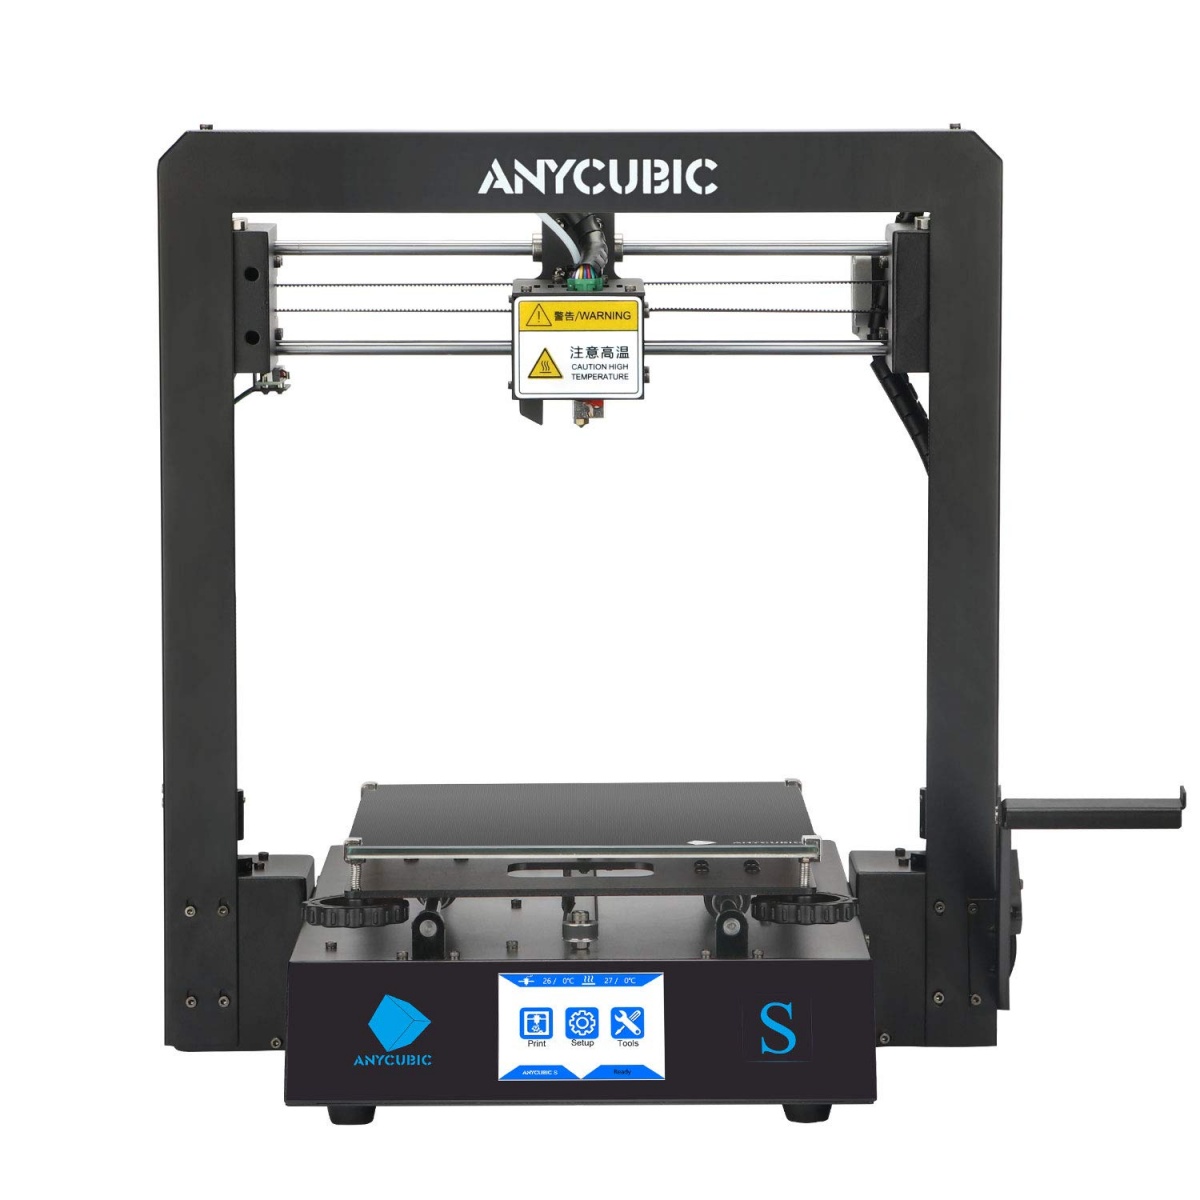 anycubic mega s 3d printer review